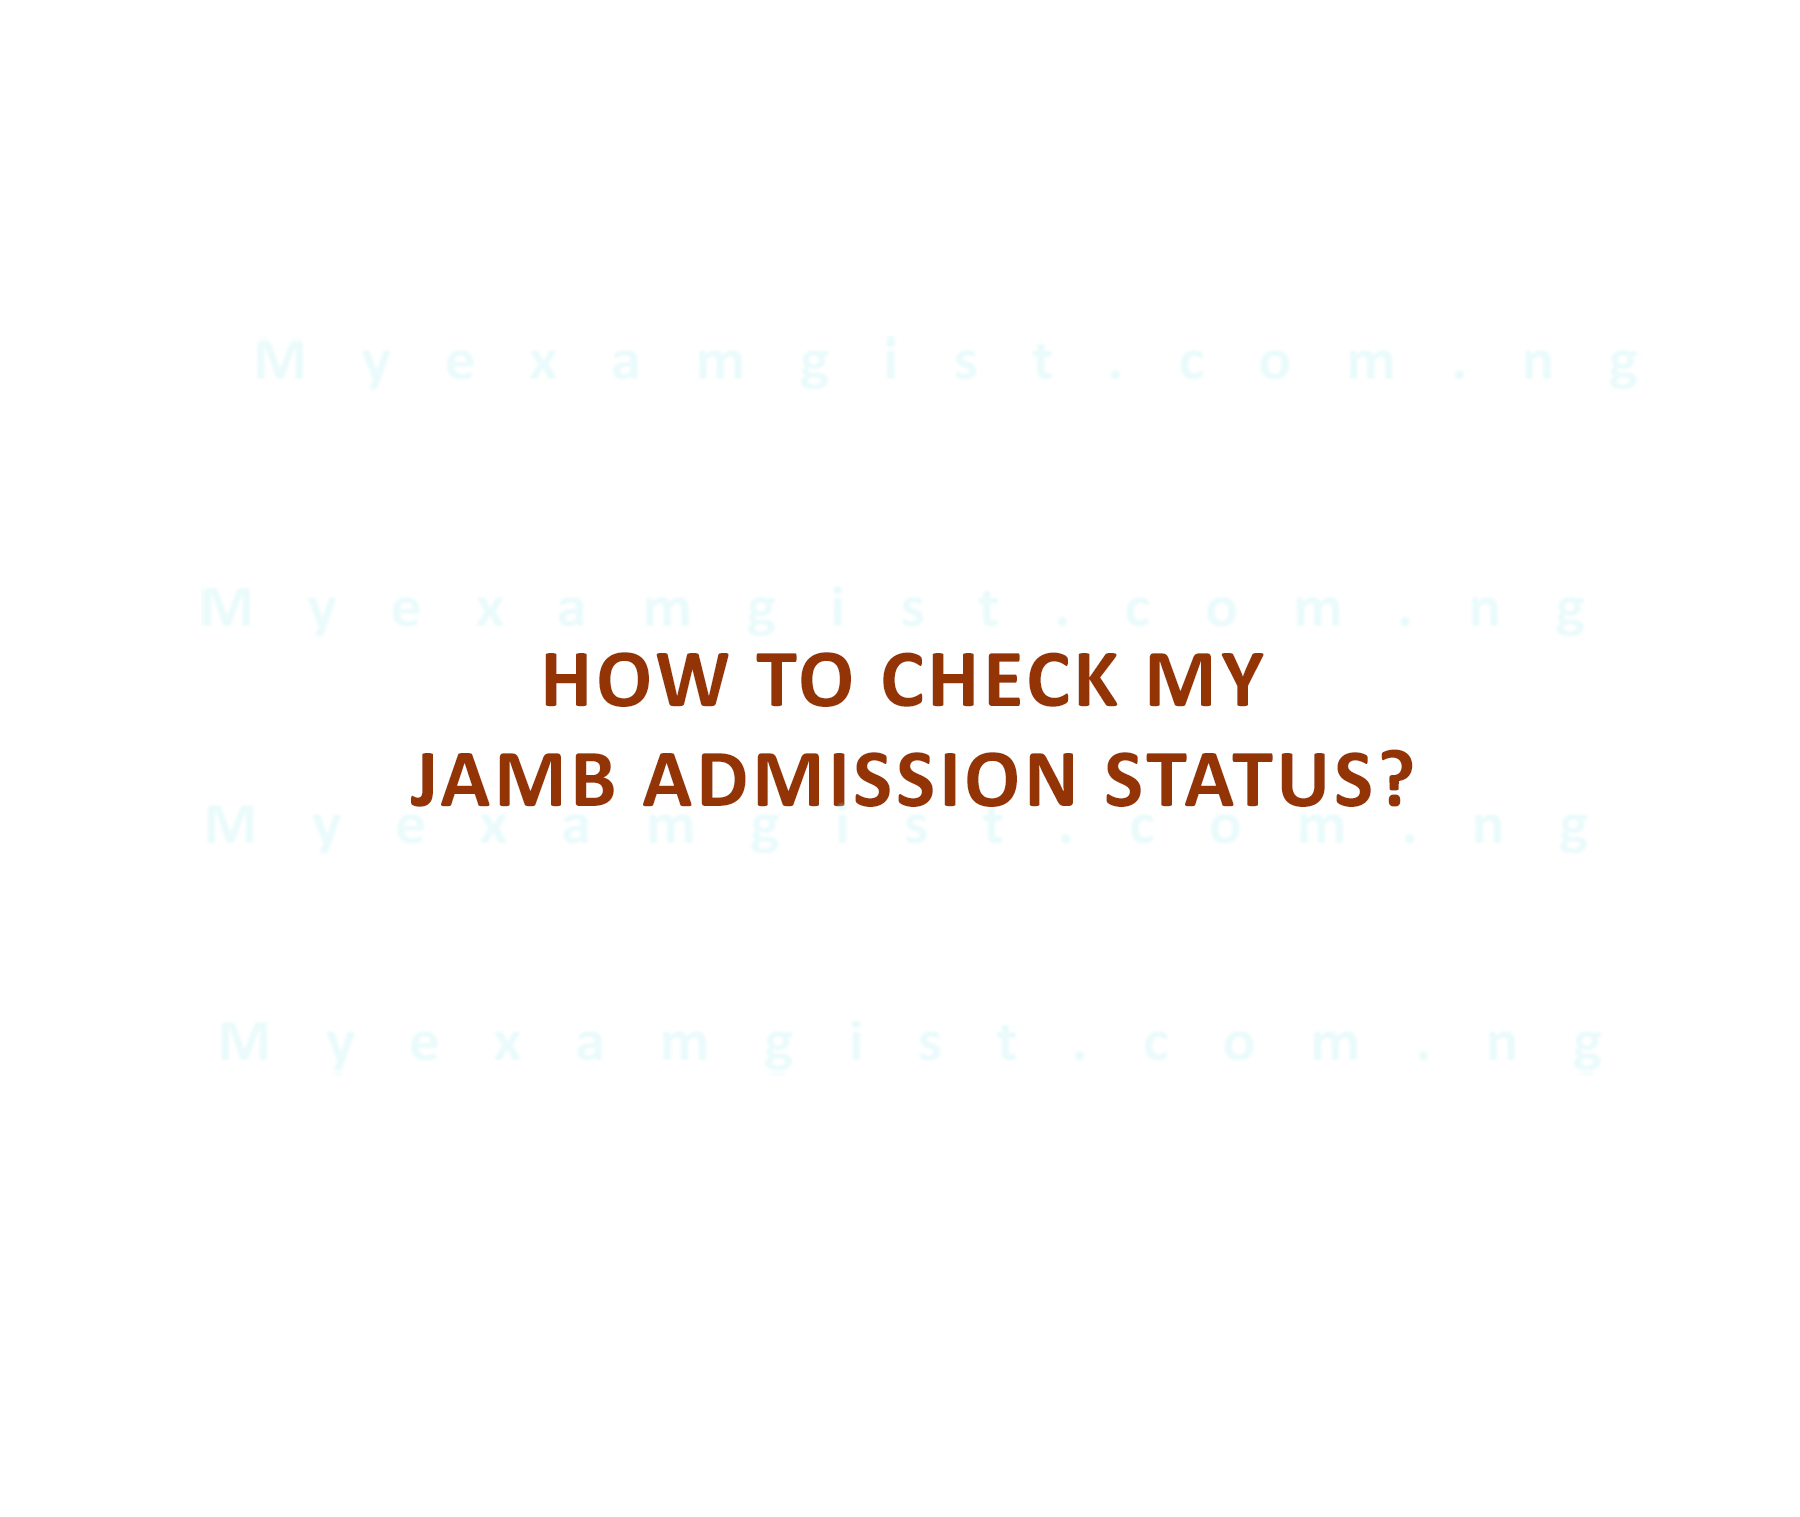 How to check my jamb admission status